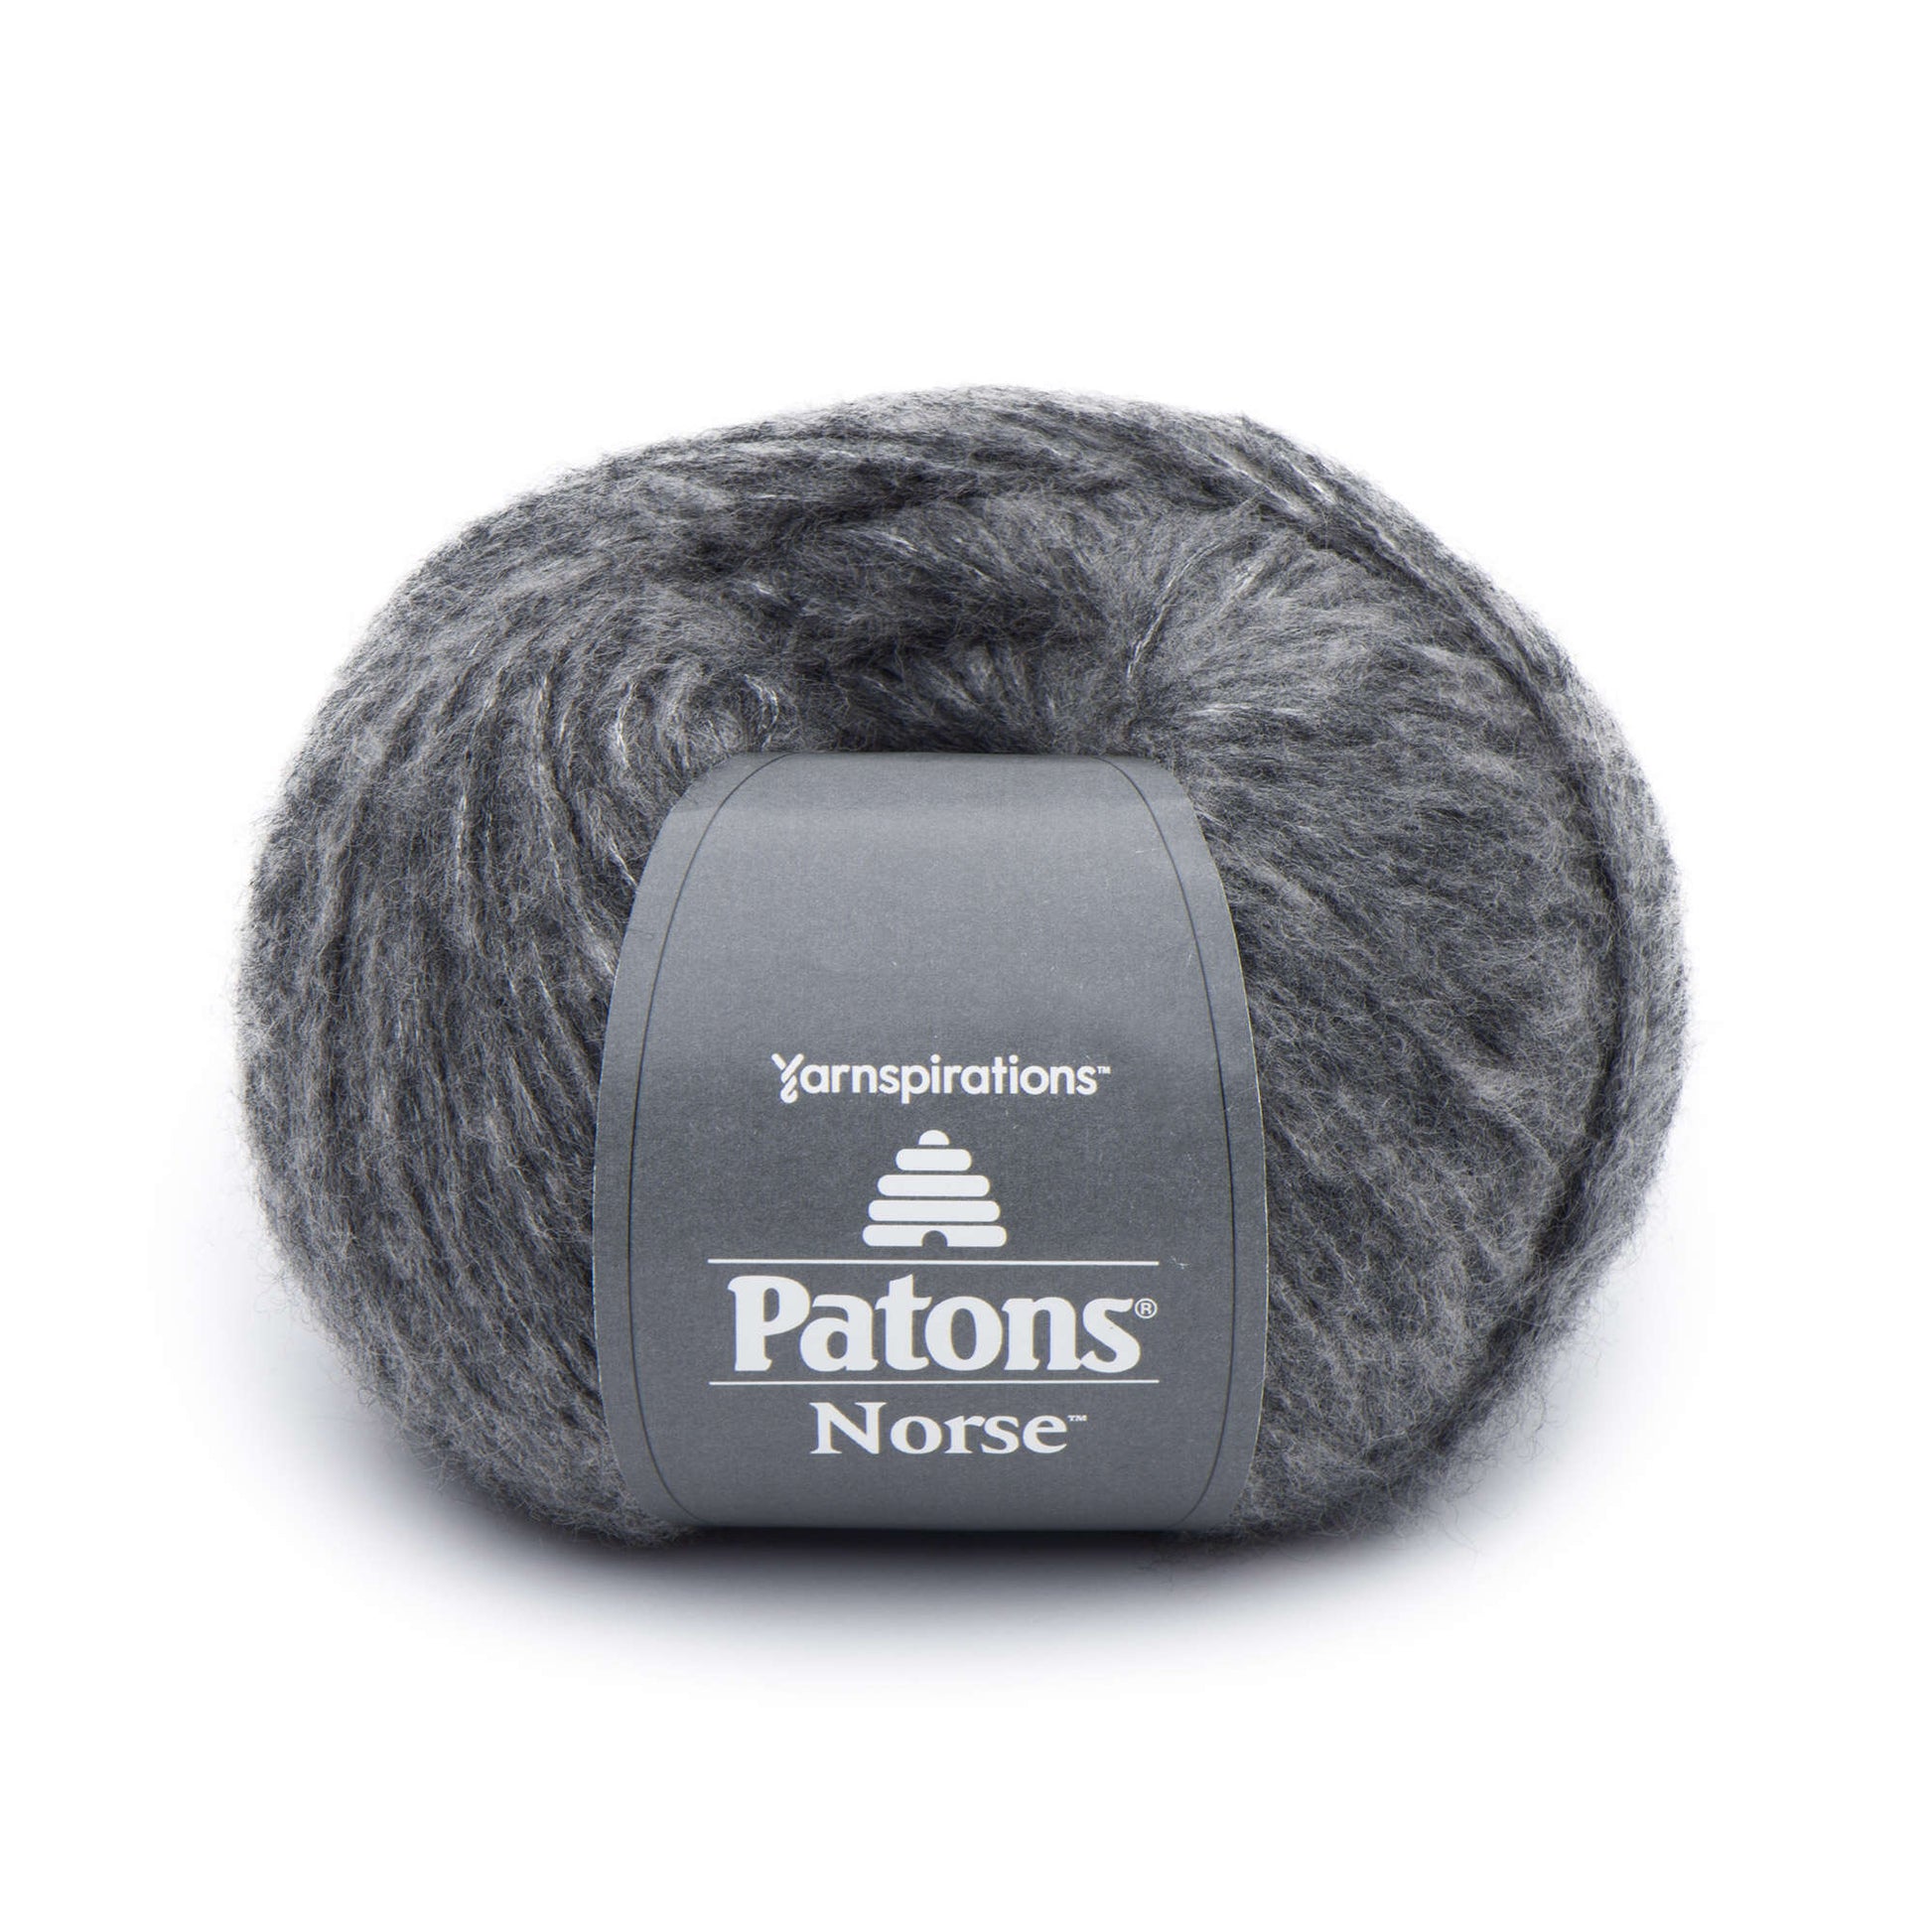 Patons Norse Yarn - Clearance shades Silver